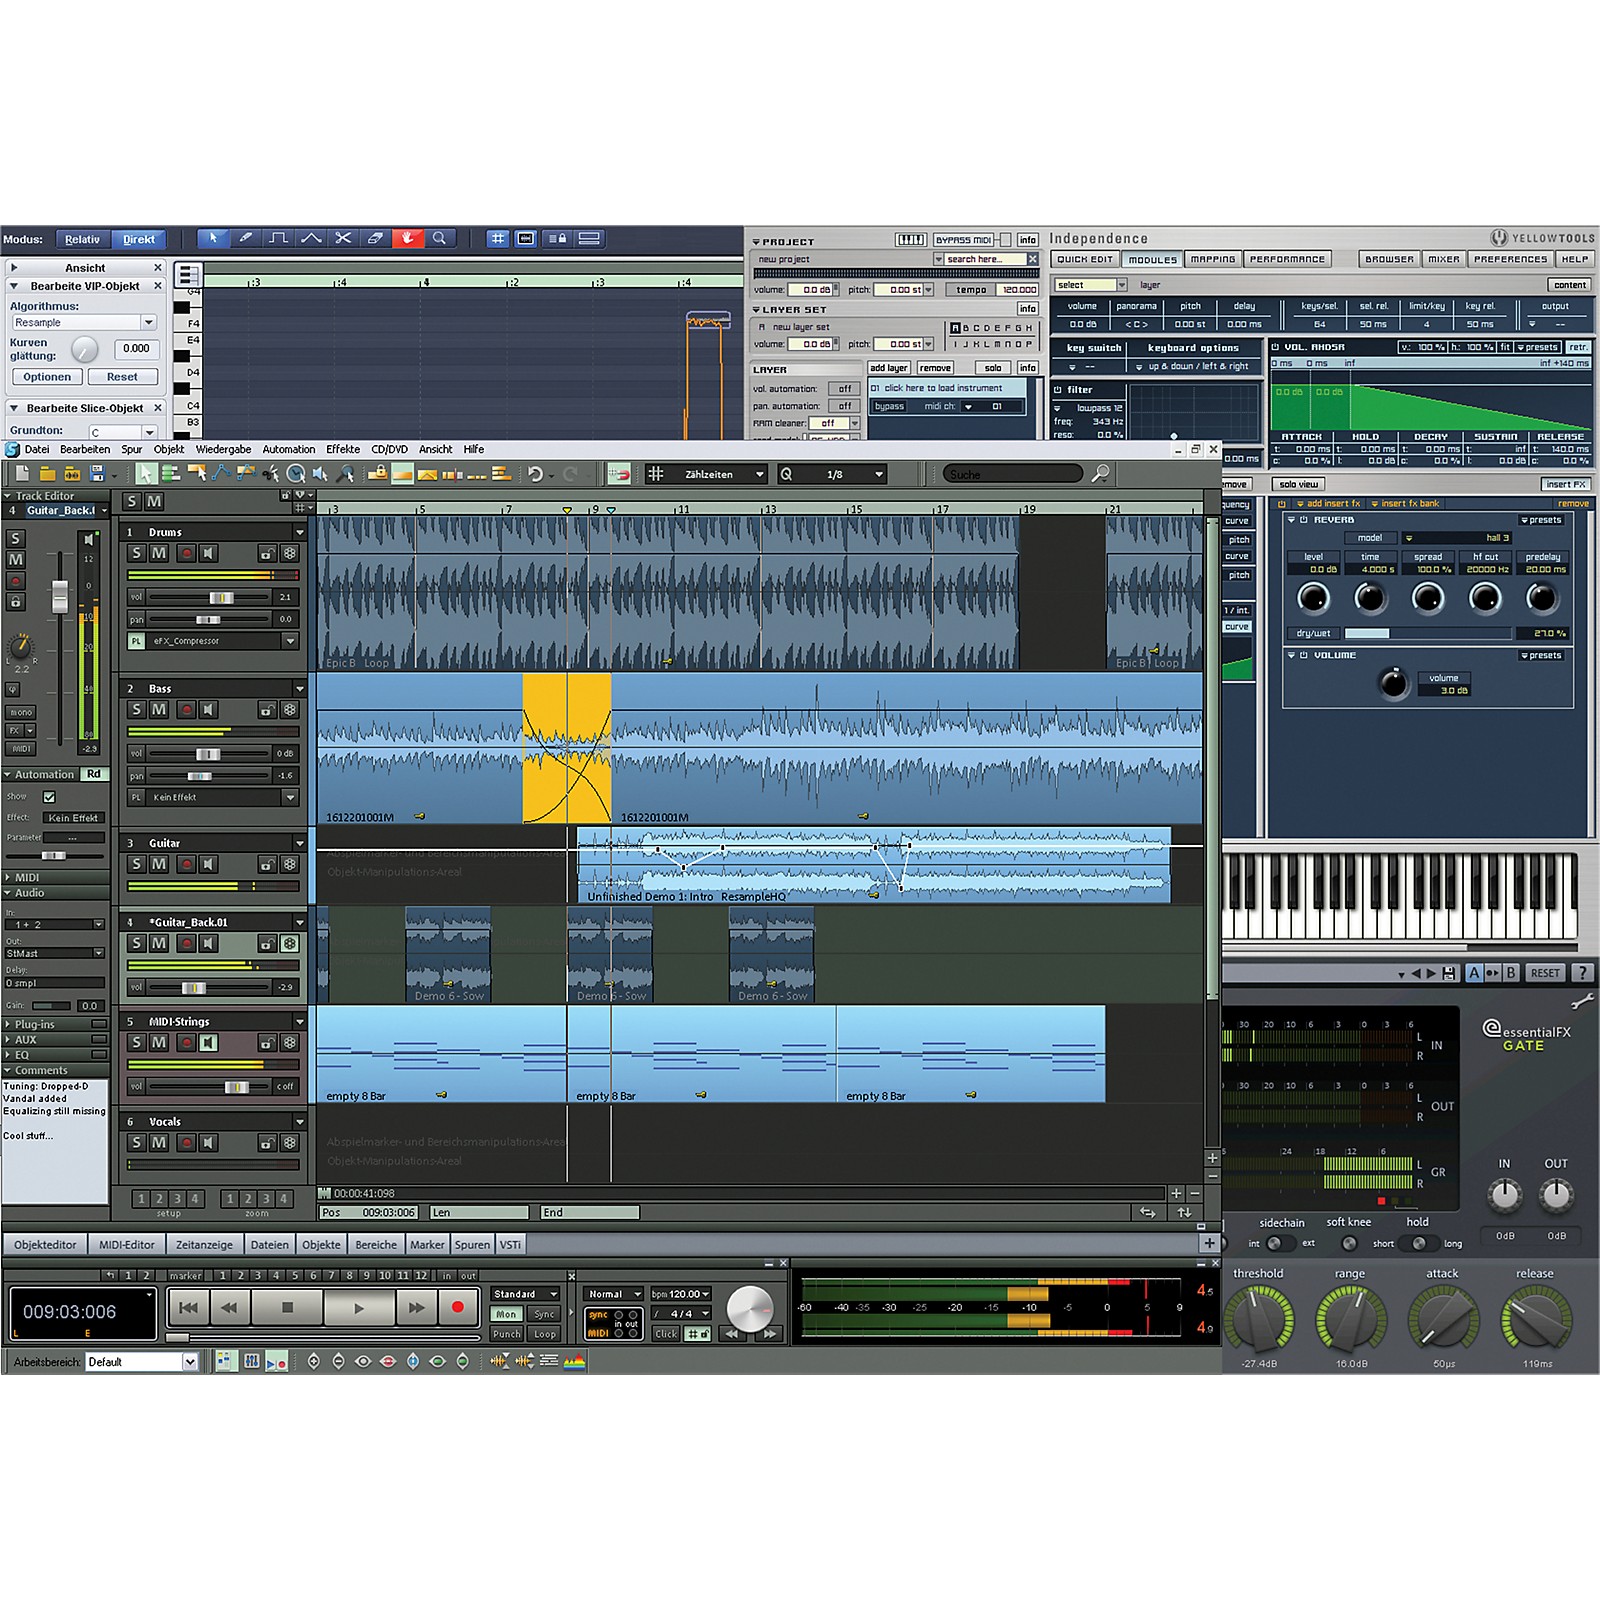 MAGIX Samplitude Pro X8 Suite 19.0.1.23115 instal the last version for android